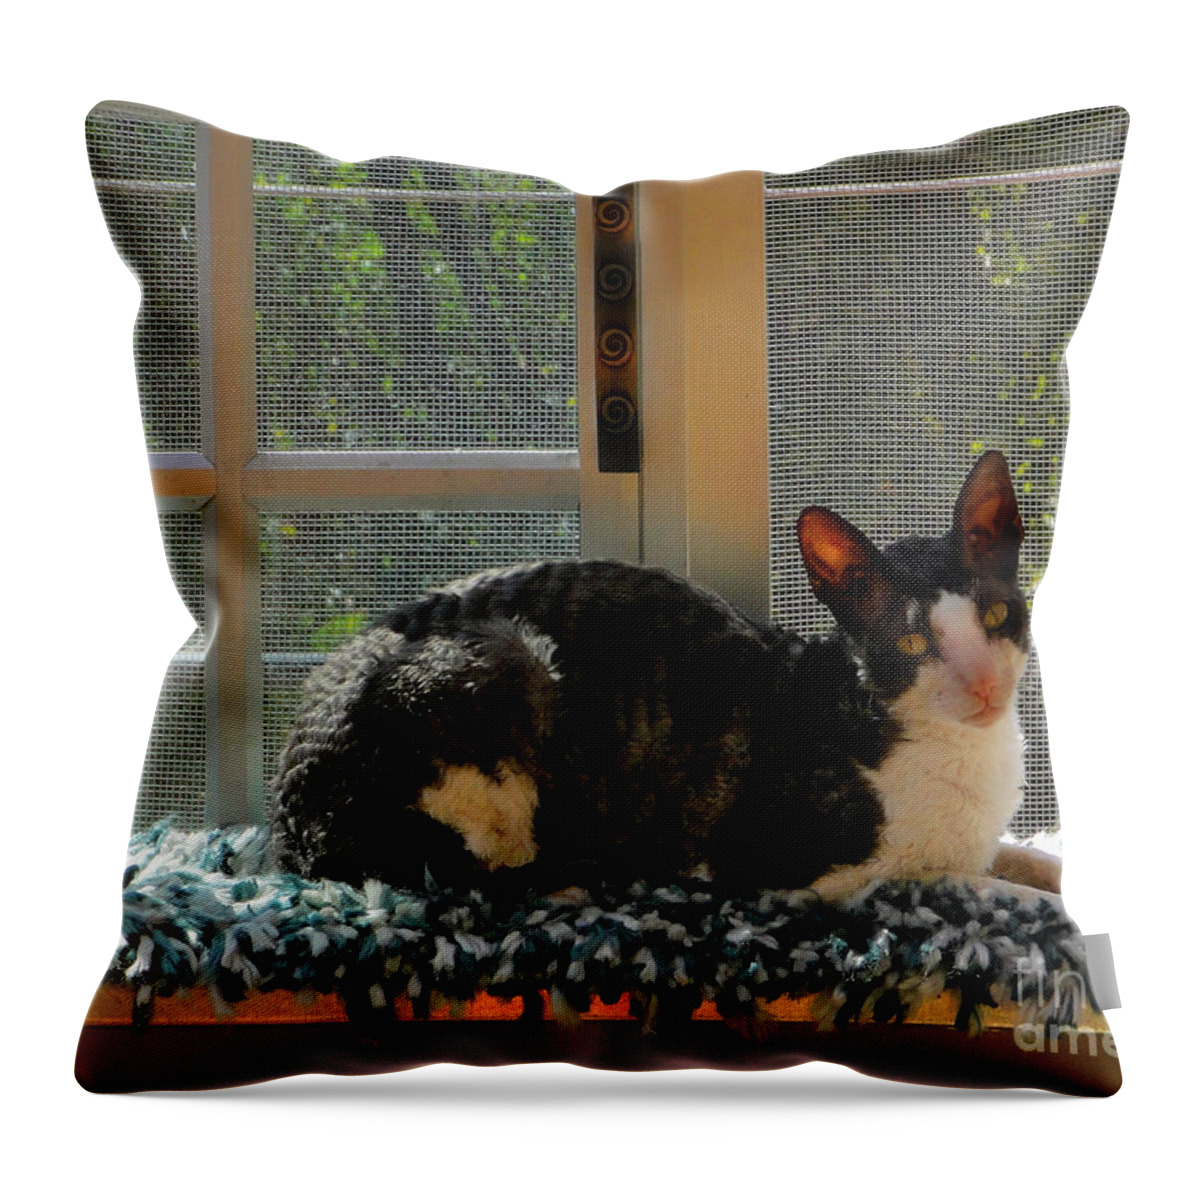 Peso Throw Pillow featuring the photograph Relaxation by Al Bourassa